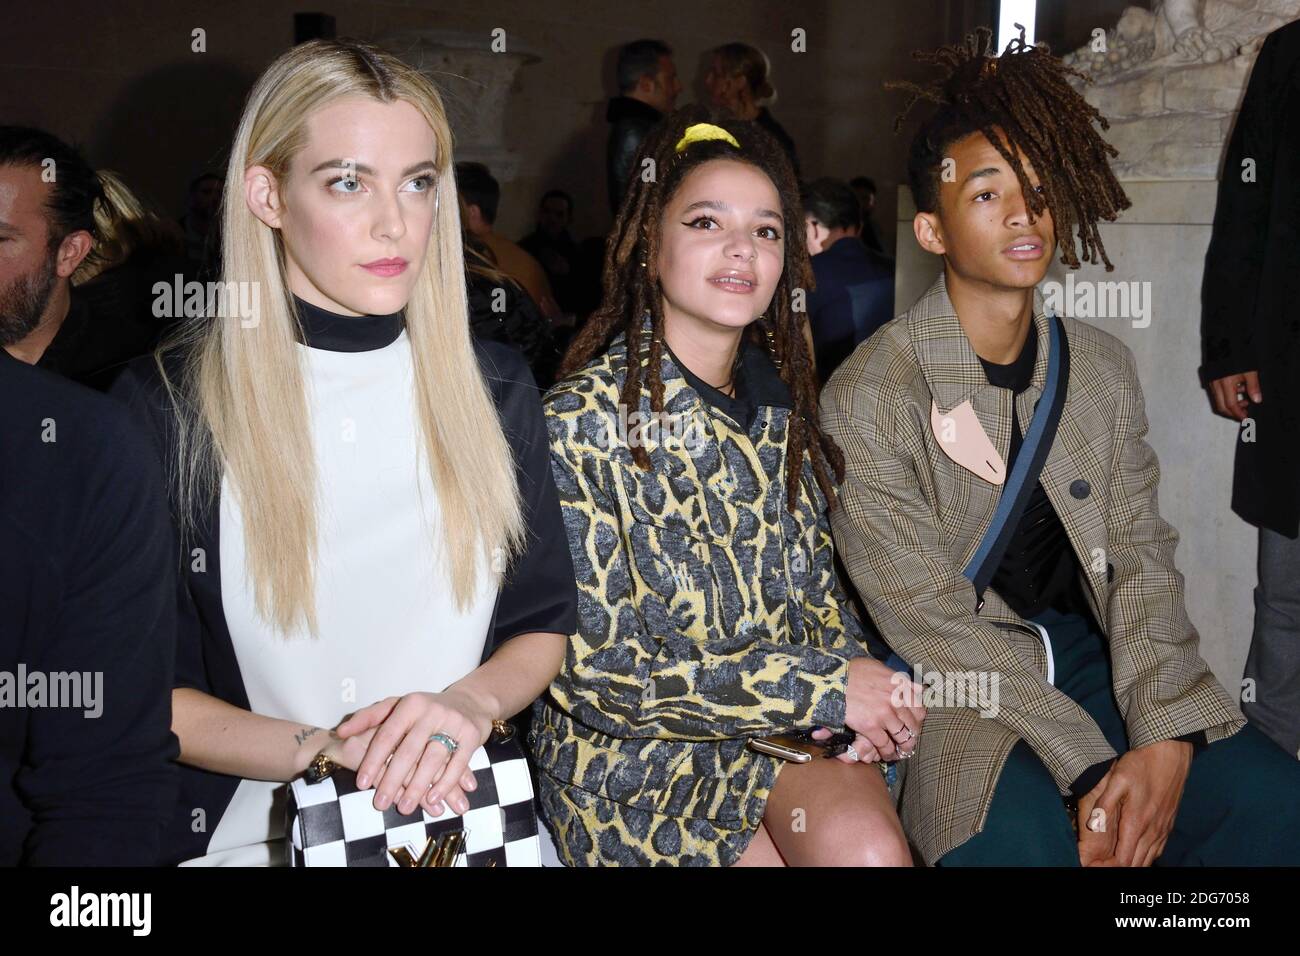 Riley Keough, Sasha Lane and Jaden Smith attending the Louis Vuitton show  during Paris Fashion Week Ready to wear FallWinter 2017-18 on March 07,  2017 at the Louvre museum in Paris, France.